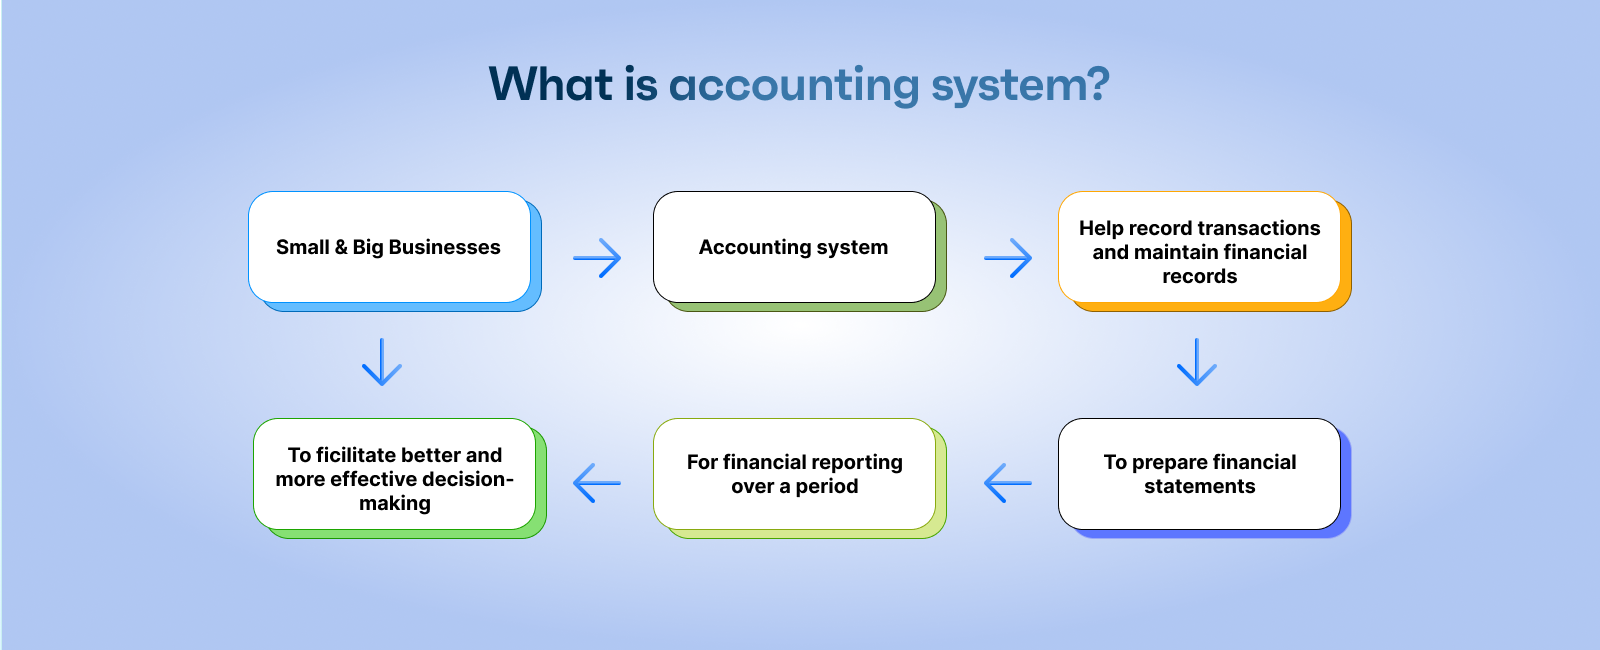 what-is-accounting-system.png